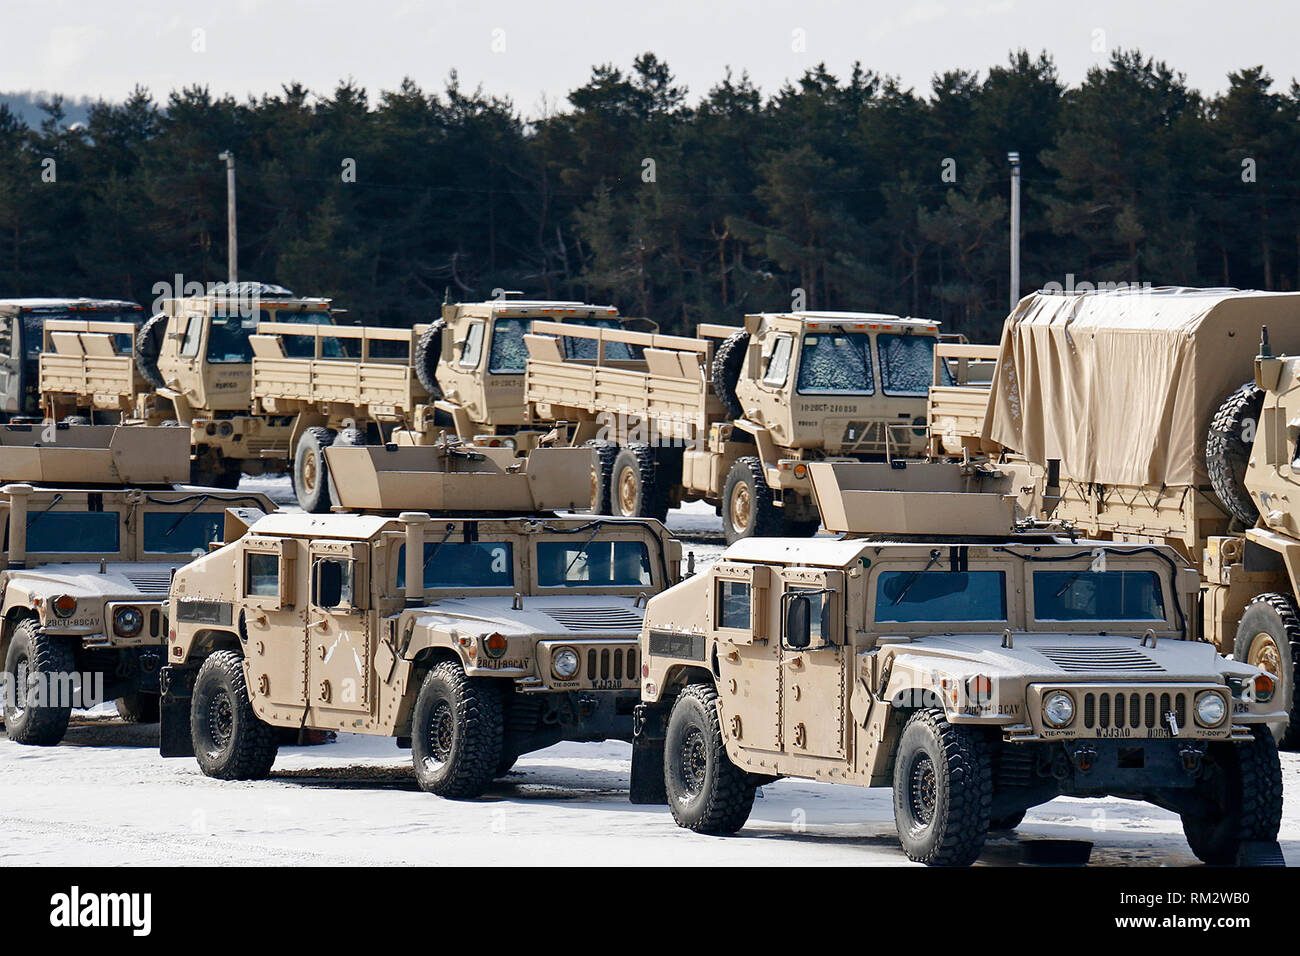 Soldiers of the 2nd Brigade Combat Team, 10th Mountain Division, load vehicles for transport to Fort Polk, Louisiana, as the brigade's rear element prepares for a series of training support missions for units across the division, February 11, 2019, at Fort Drum, New York. While half the brigade is deployed to Afghanistan and Kosovo as Task Force Courage, the remaining Commando Soldiers comprising Task Forces Honor and Hale will head to the Joint Readiness Training Center to support 10MTN readiness as a whole during a series of back-to-back series of training exercises.(U.S. Army photo by Staff Stock Photo